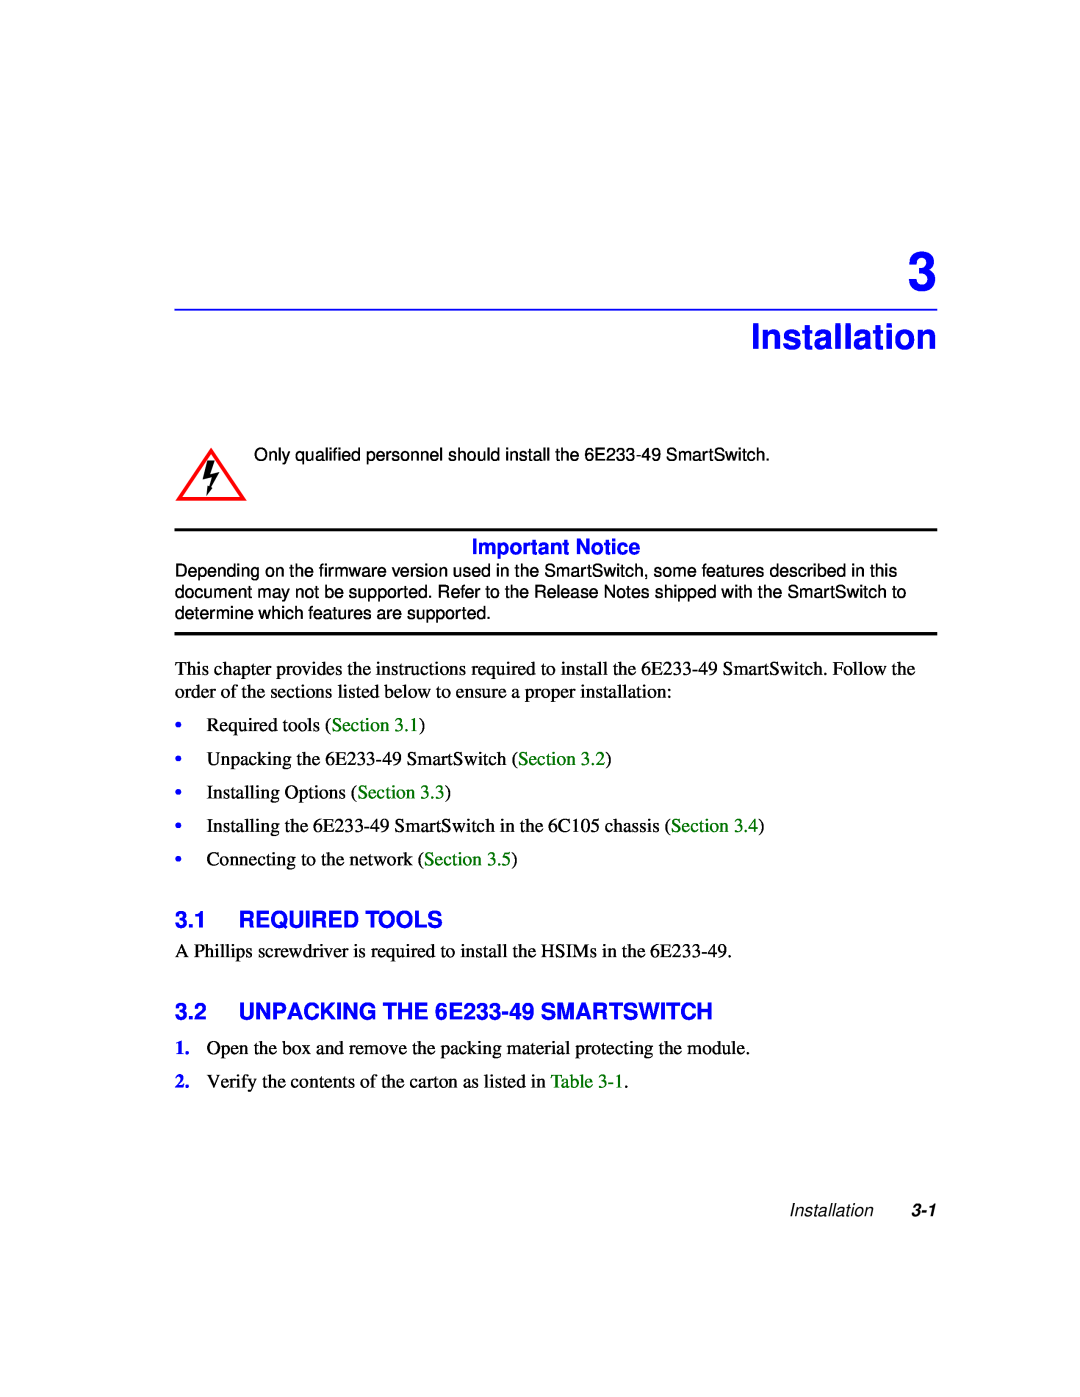 Cabletron Systems 6000 manual Installation, Required Tools, UNPACKING THE 6E233-49 SMARTSWITCH, Important Notice 